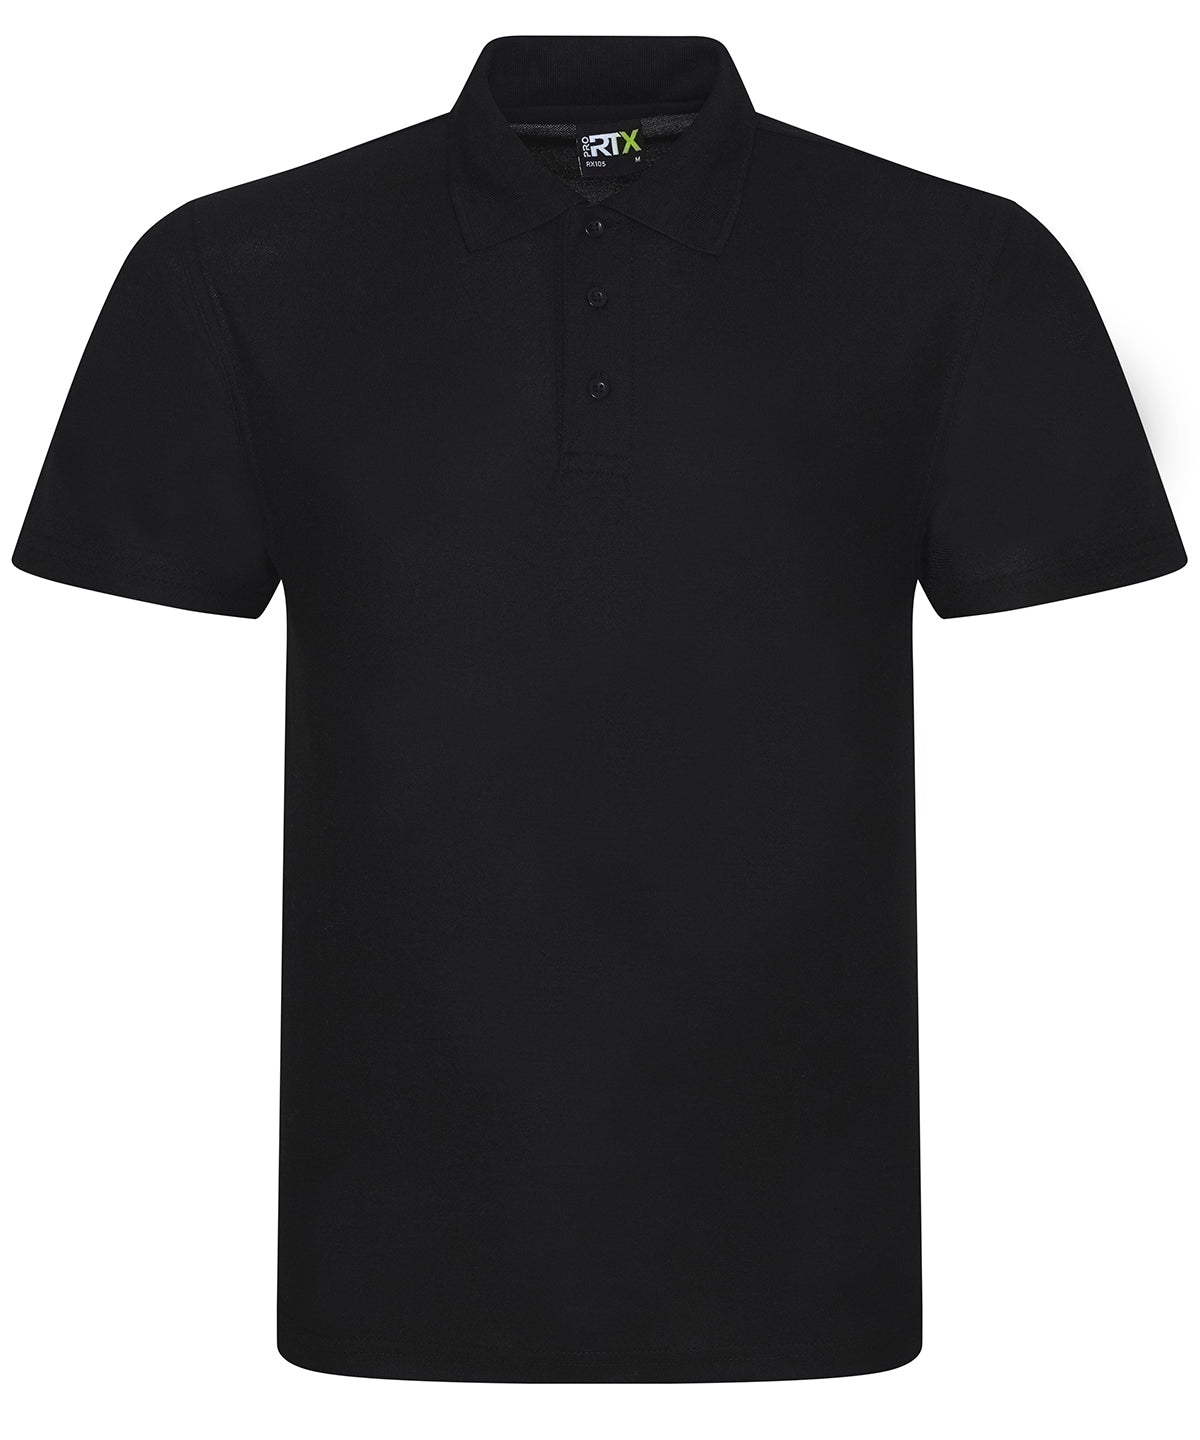 Personalised Polo Shirts - Black ProRTX Pro polyester polo